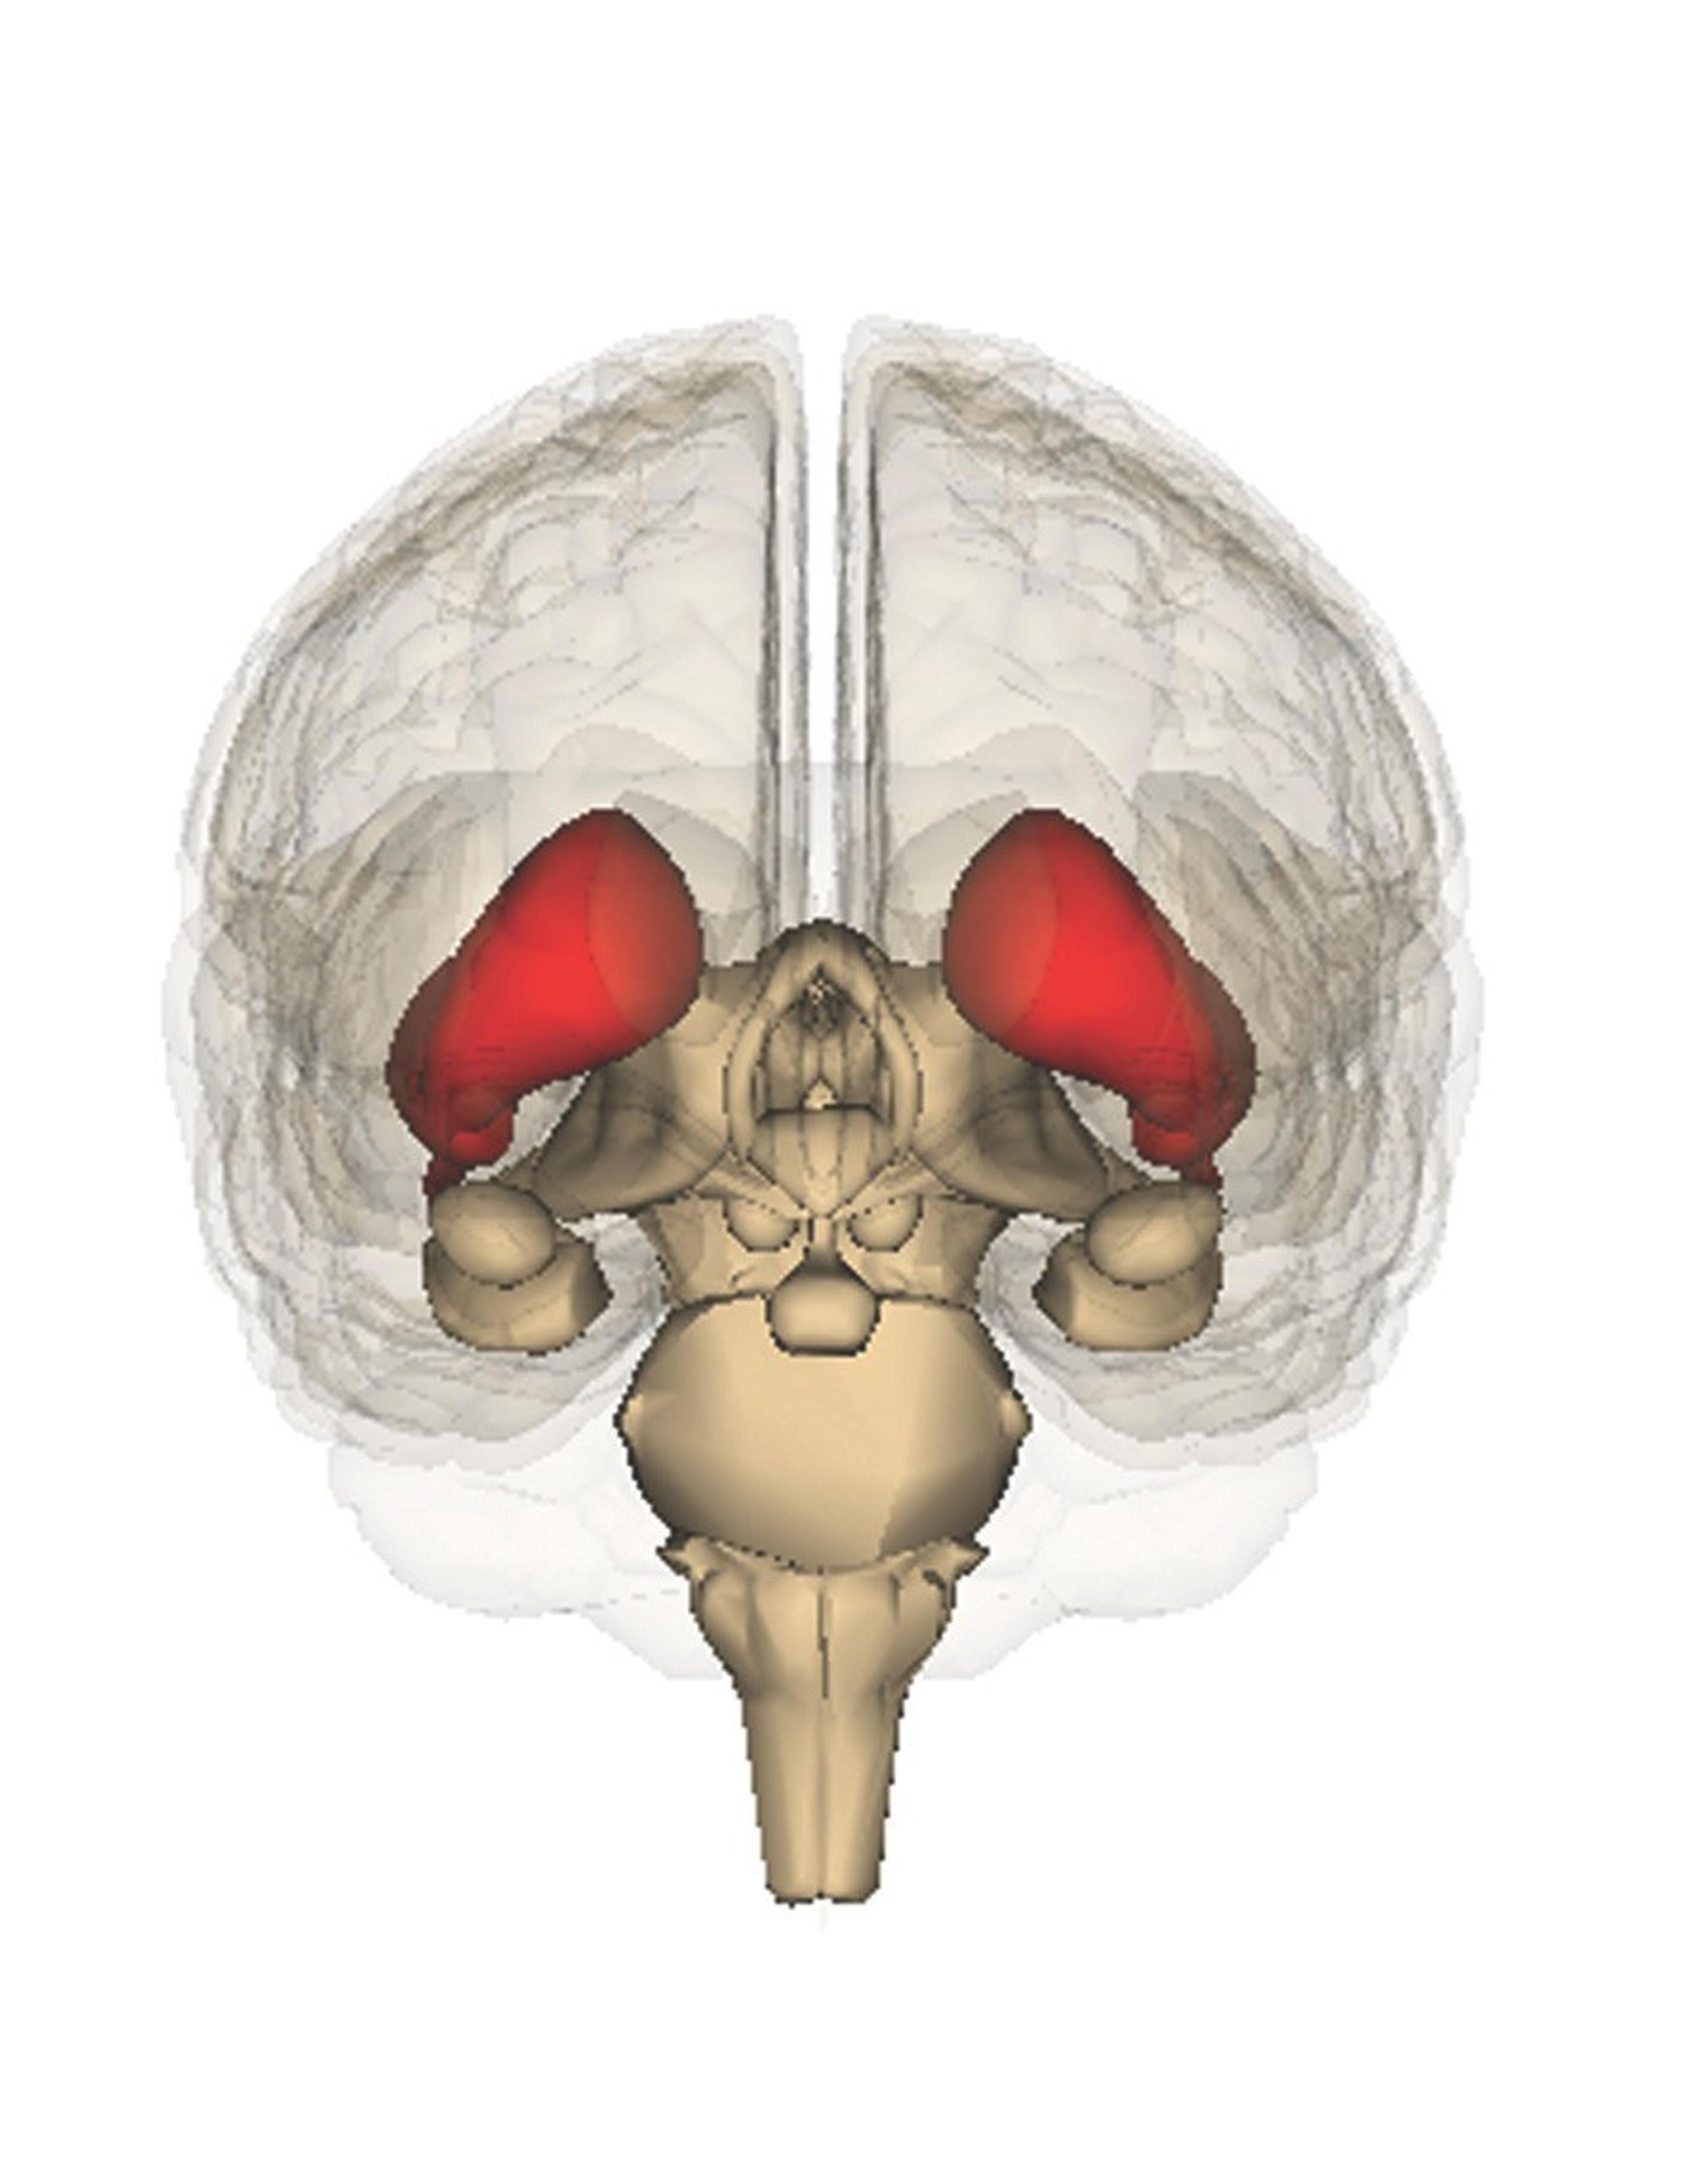 The striatum (red) plays an important role in the learning of new tasks by a ‘use it or lose it’ process of reinforcement of nerve signalling pathways. Abnormalities in the same neural circuits are linked to disorders such as Huntington’s disease, Parkinson’s disease, obsessive-compulsive disorder, and autism.